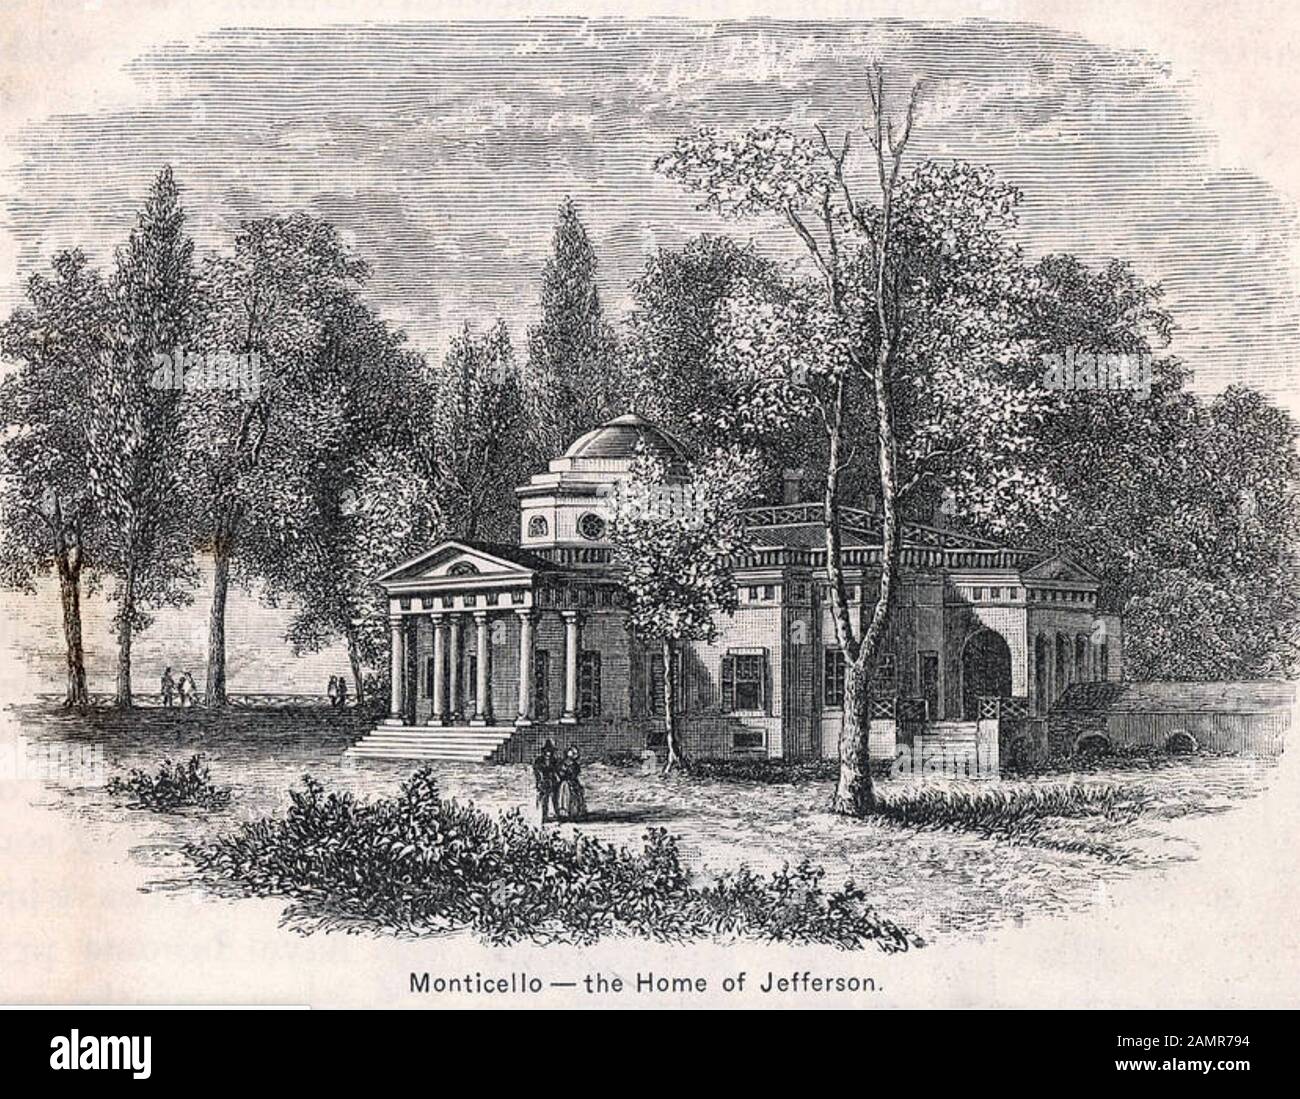 THOMAS JEFFERSON (1743-1826) 3rd President of the United States. His plantation home in Monticello, Virginia,  shown in 1887 Stock Photo